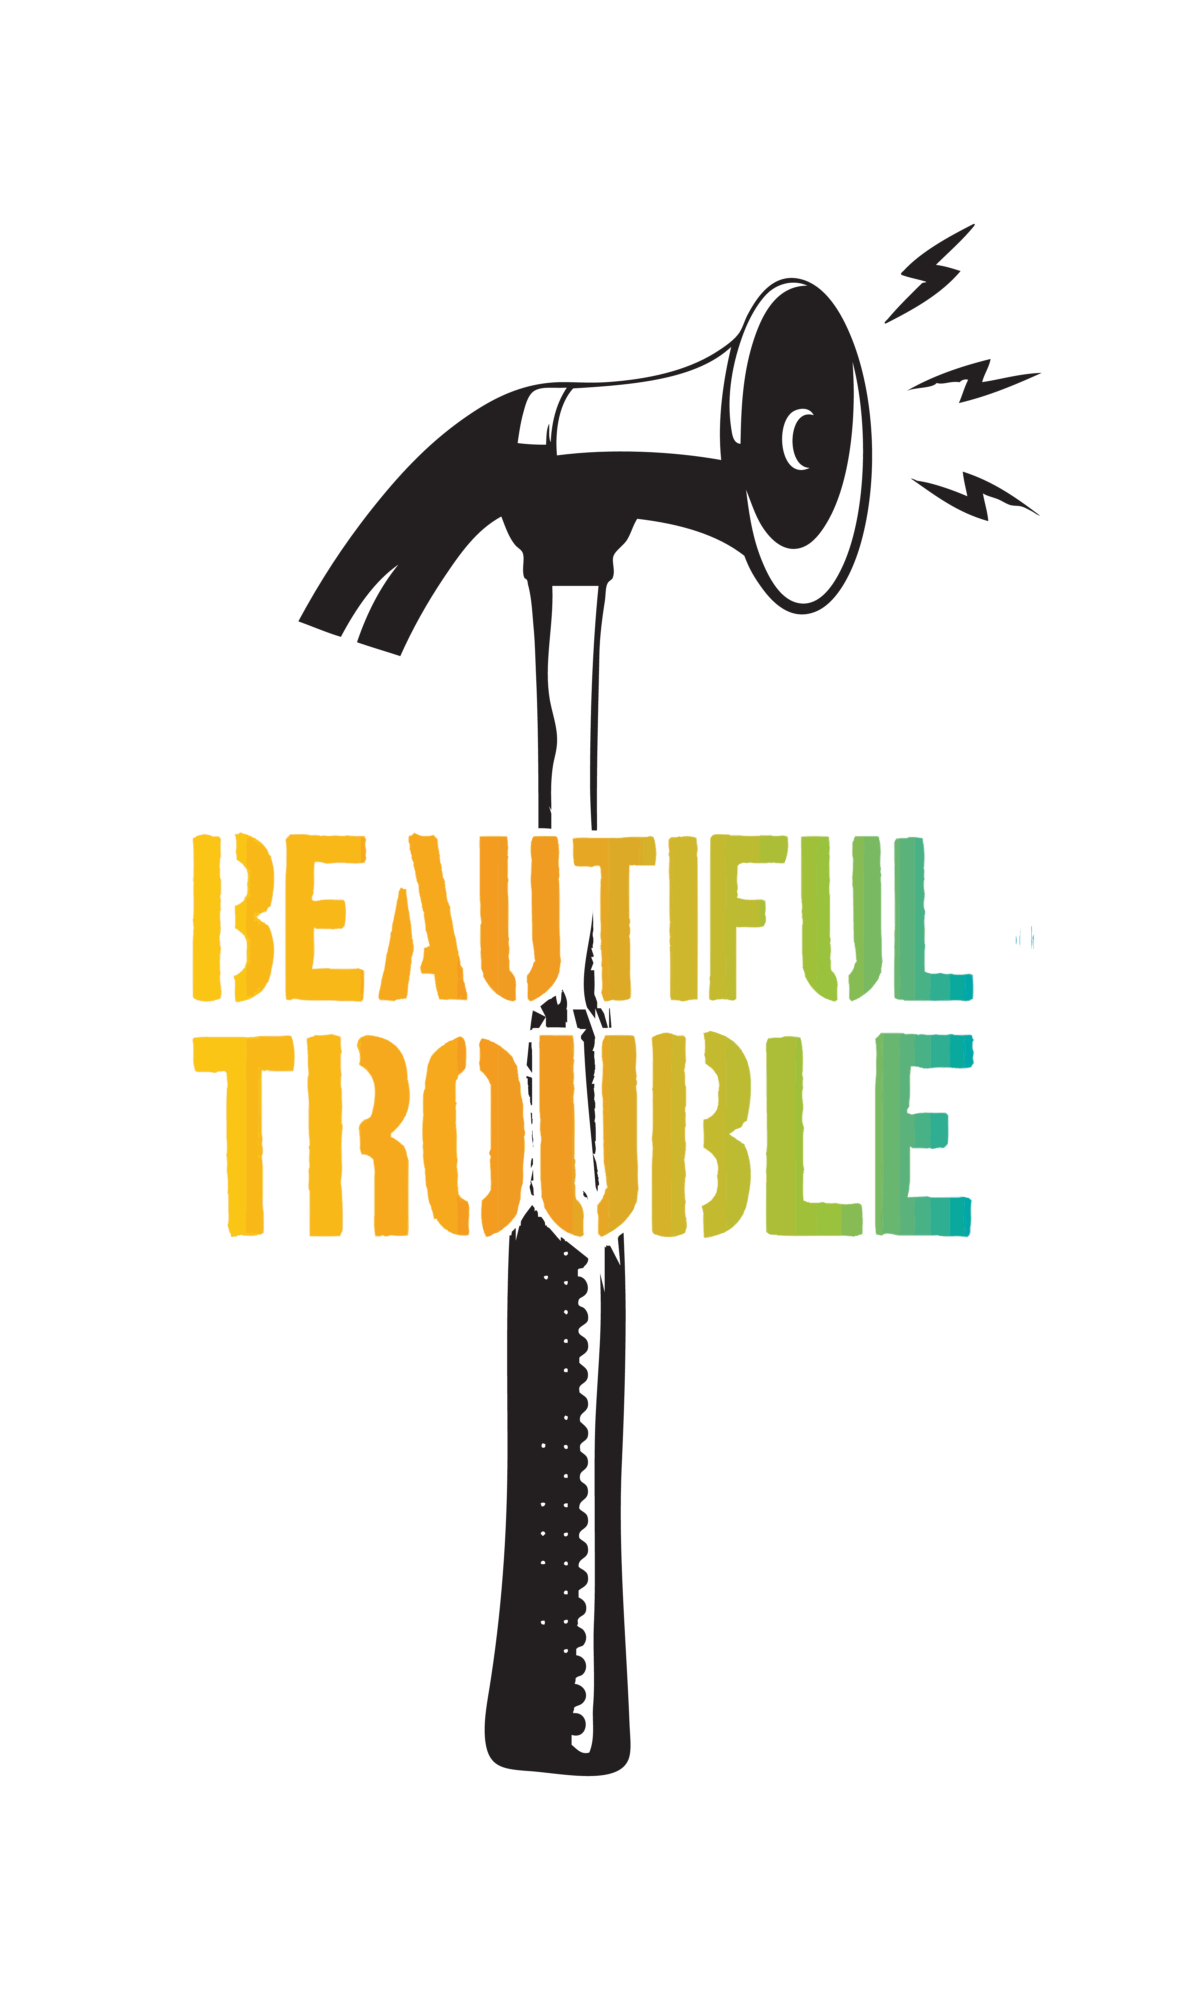 A graphic of a black hammer with the words “BEAUTIFUL TROUBLE” superimposed upon it in a gradient from yellow to blue.